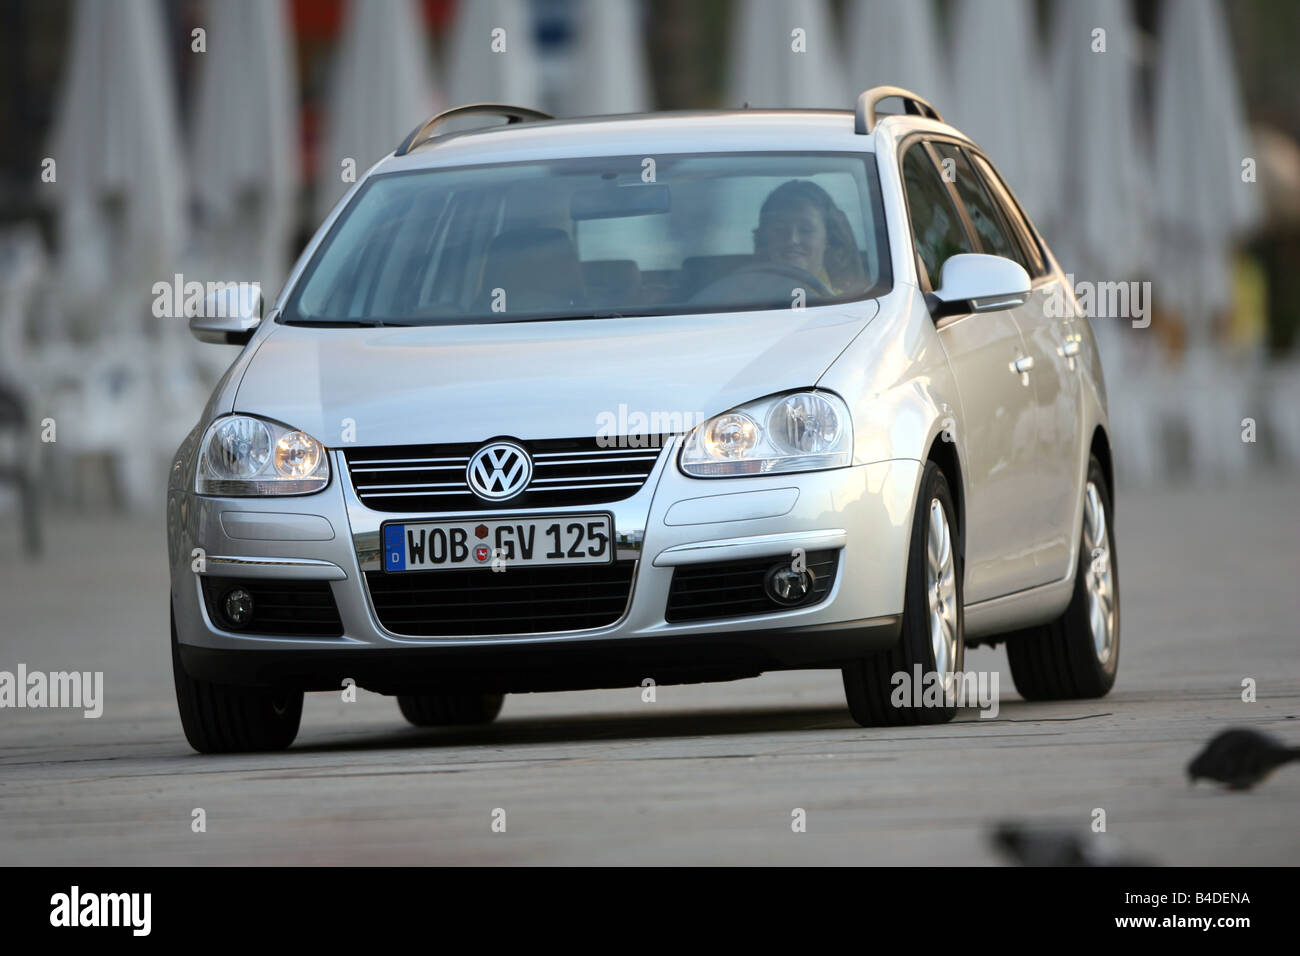 VW Volkswagen Golf Variant 1.9 TDI Trendline, model year 2007-, silver,  driving, diagonal from the front, frontal view, City Stock Photo - Alamy